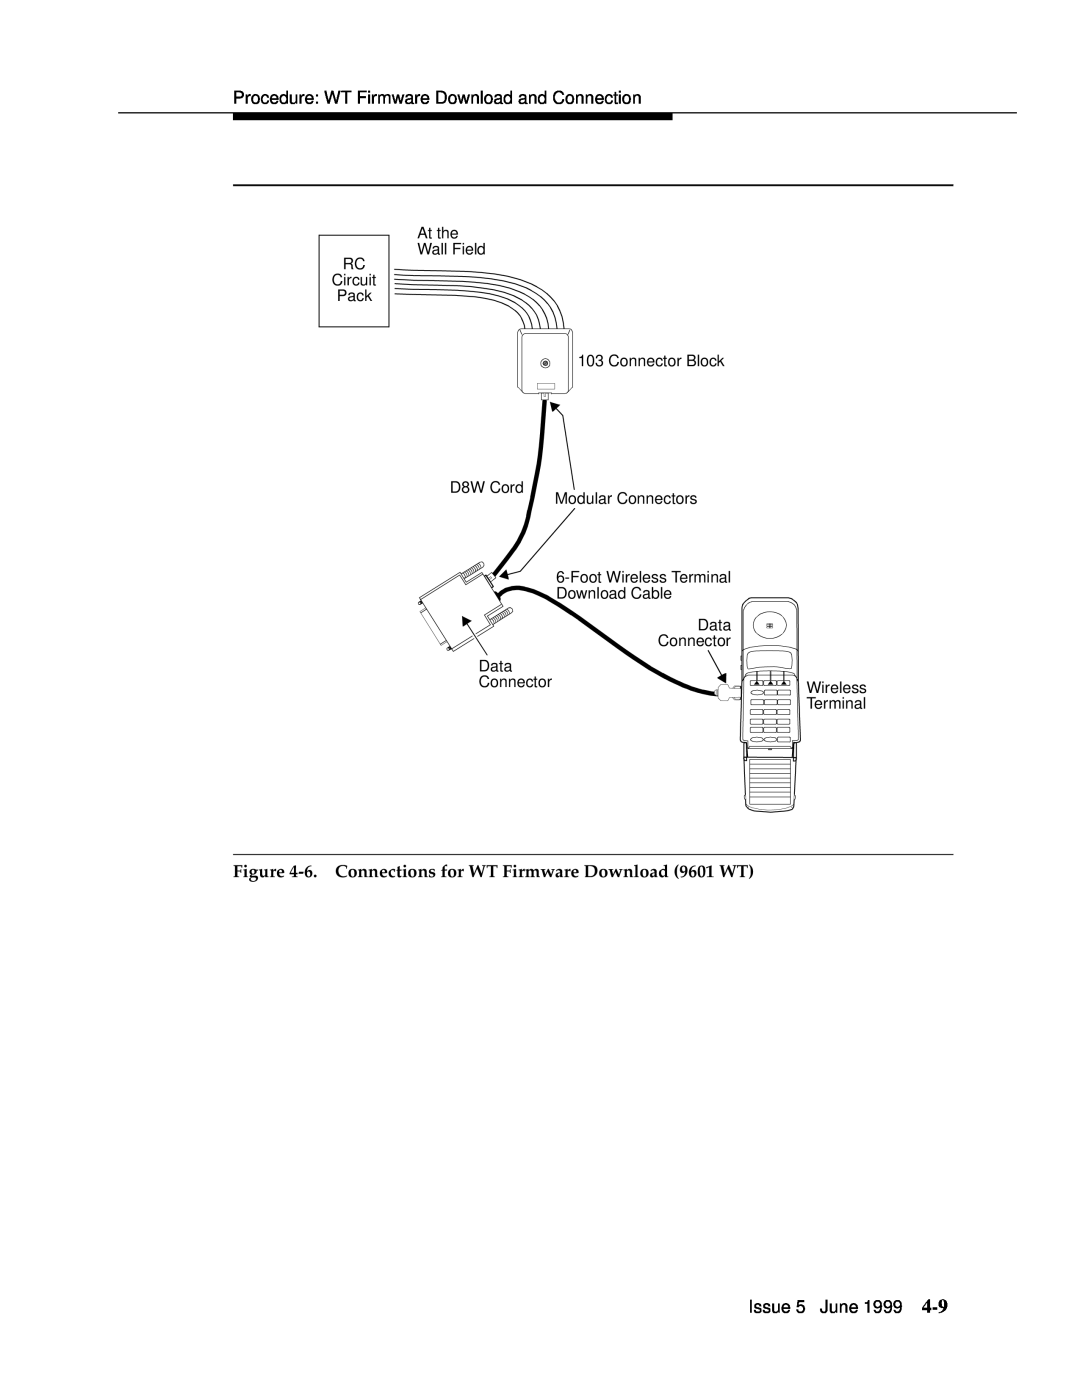 Lucent Technologies 555-232-102 manual 6. Connections for WT Firmware Download 9601 WT, Issue 5 June 1999 